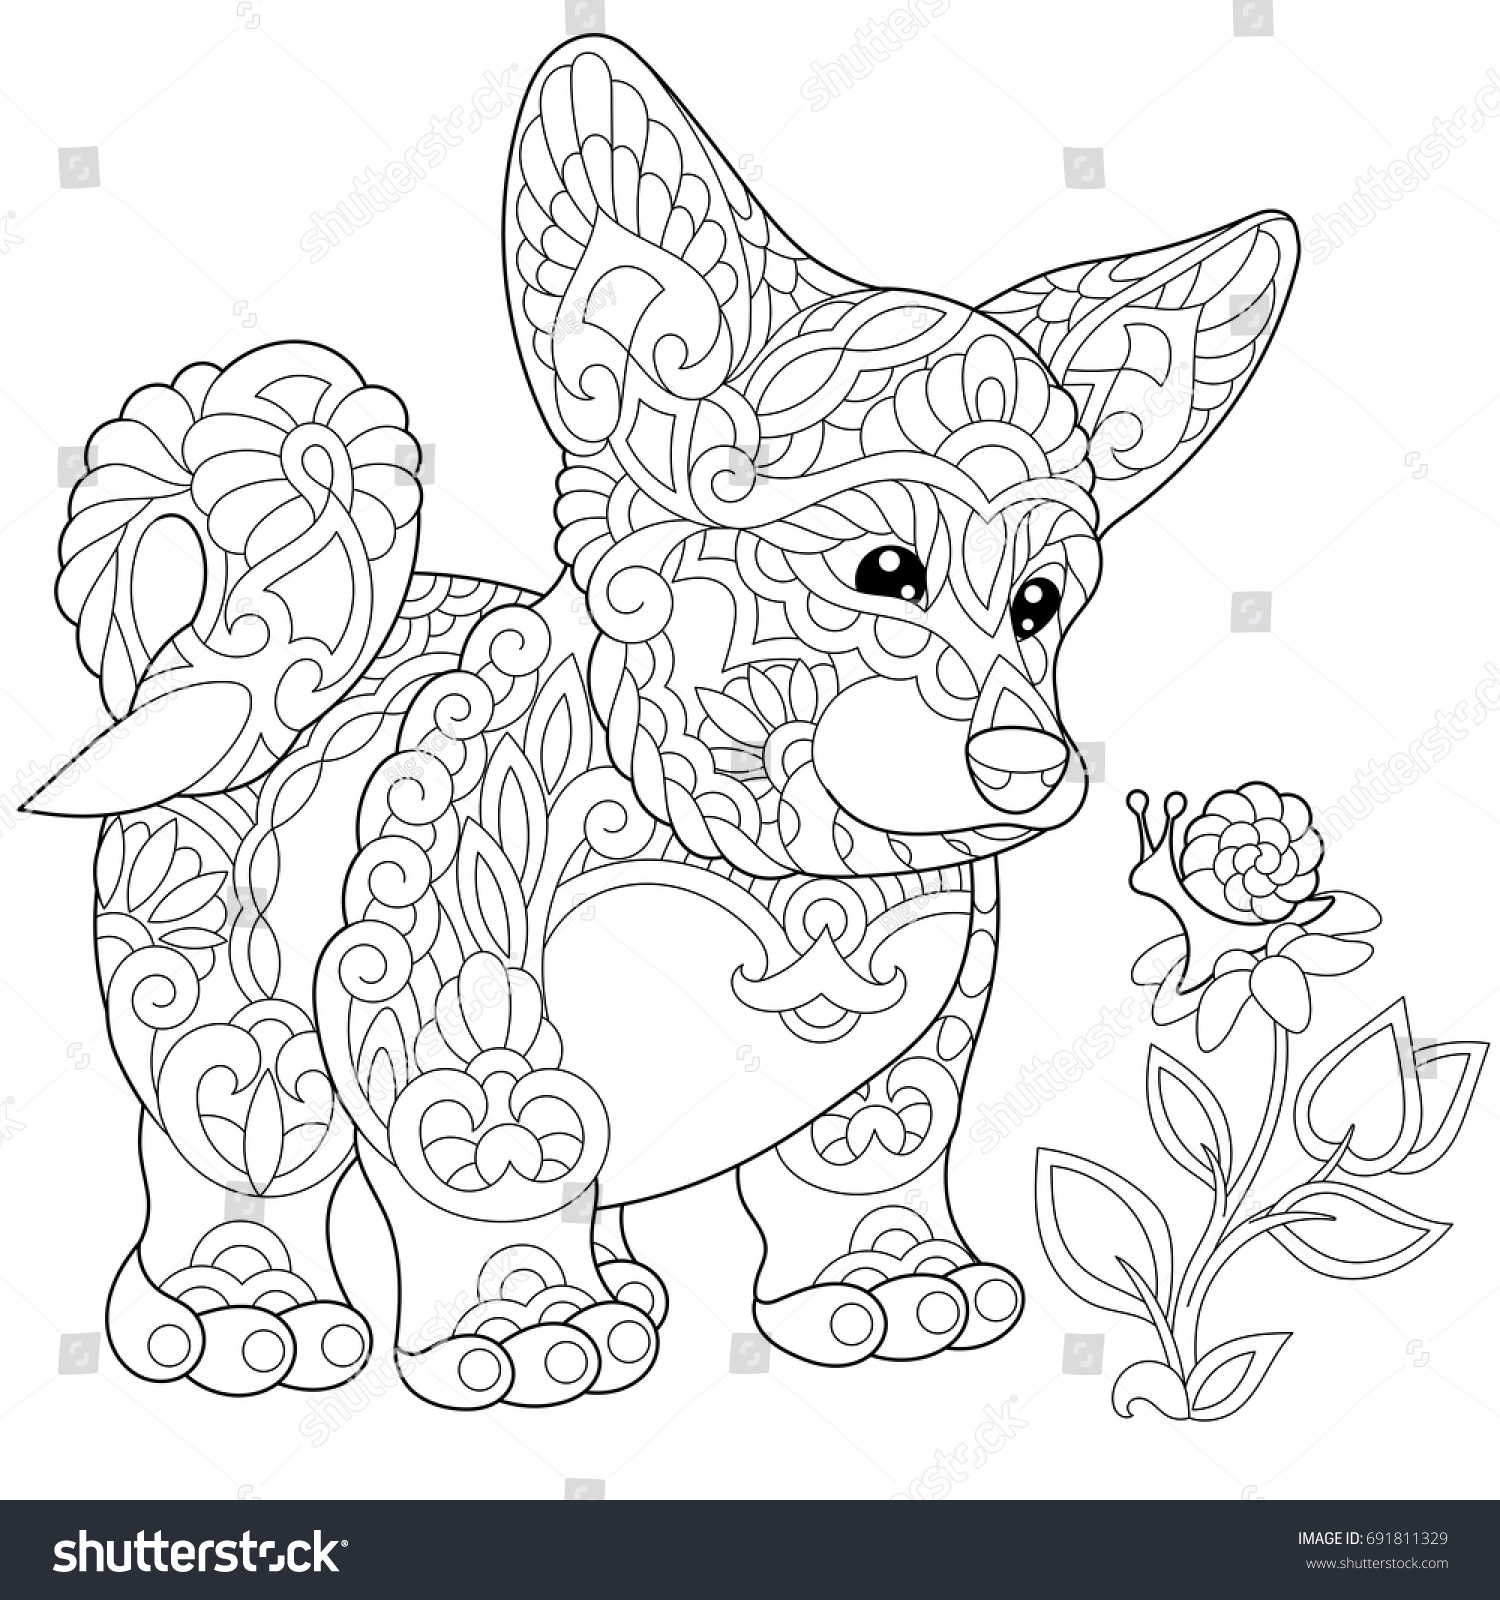 Download Coloring Page Cardigan Welsh Corgi Puppy Stock Vector 691811329 - Shutterstock